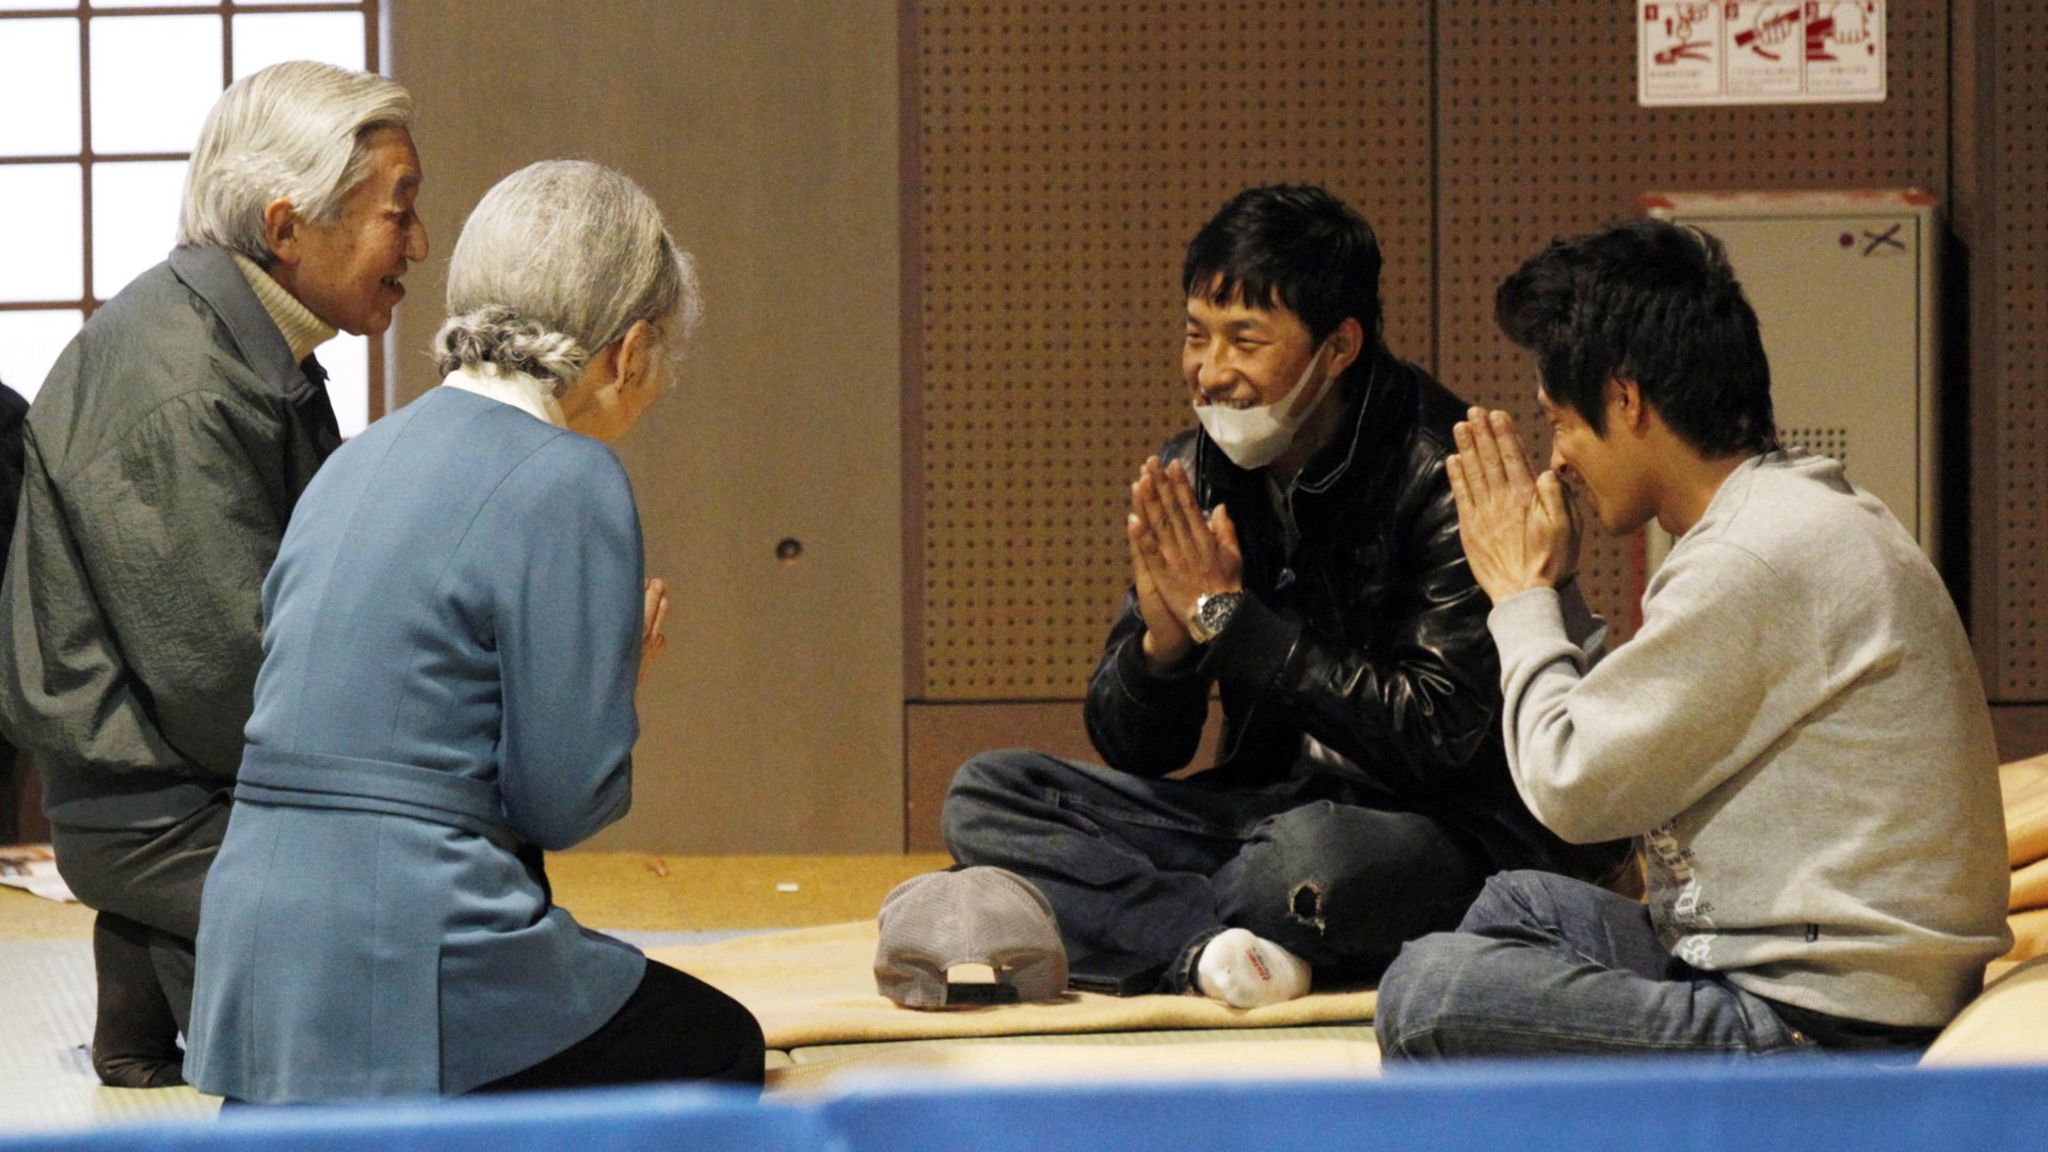 Emperor Akihito and Empress Michiko talk with evacuees from the 2011 earthquake and tsunami.